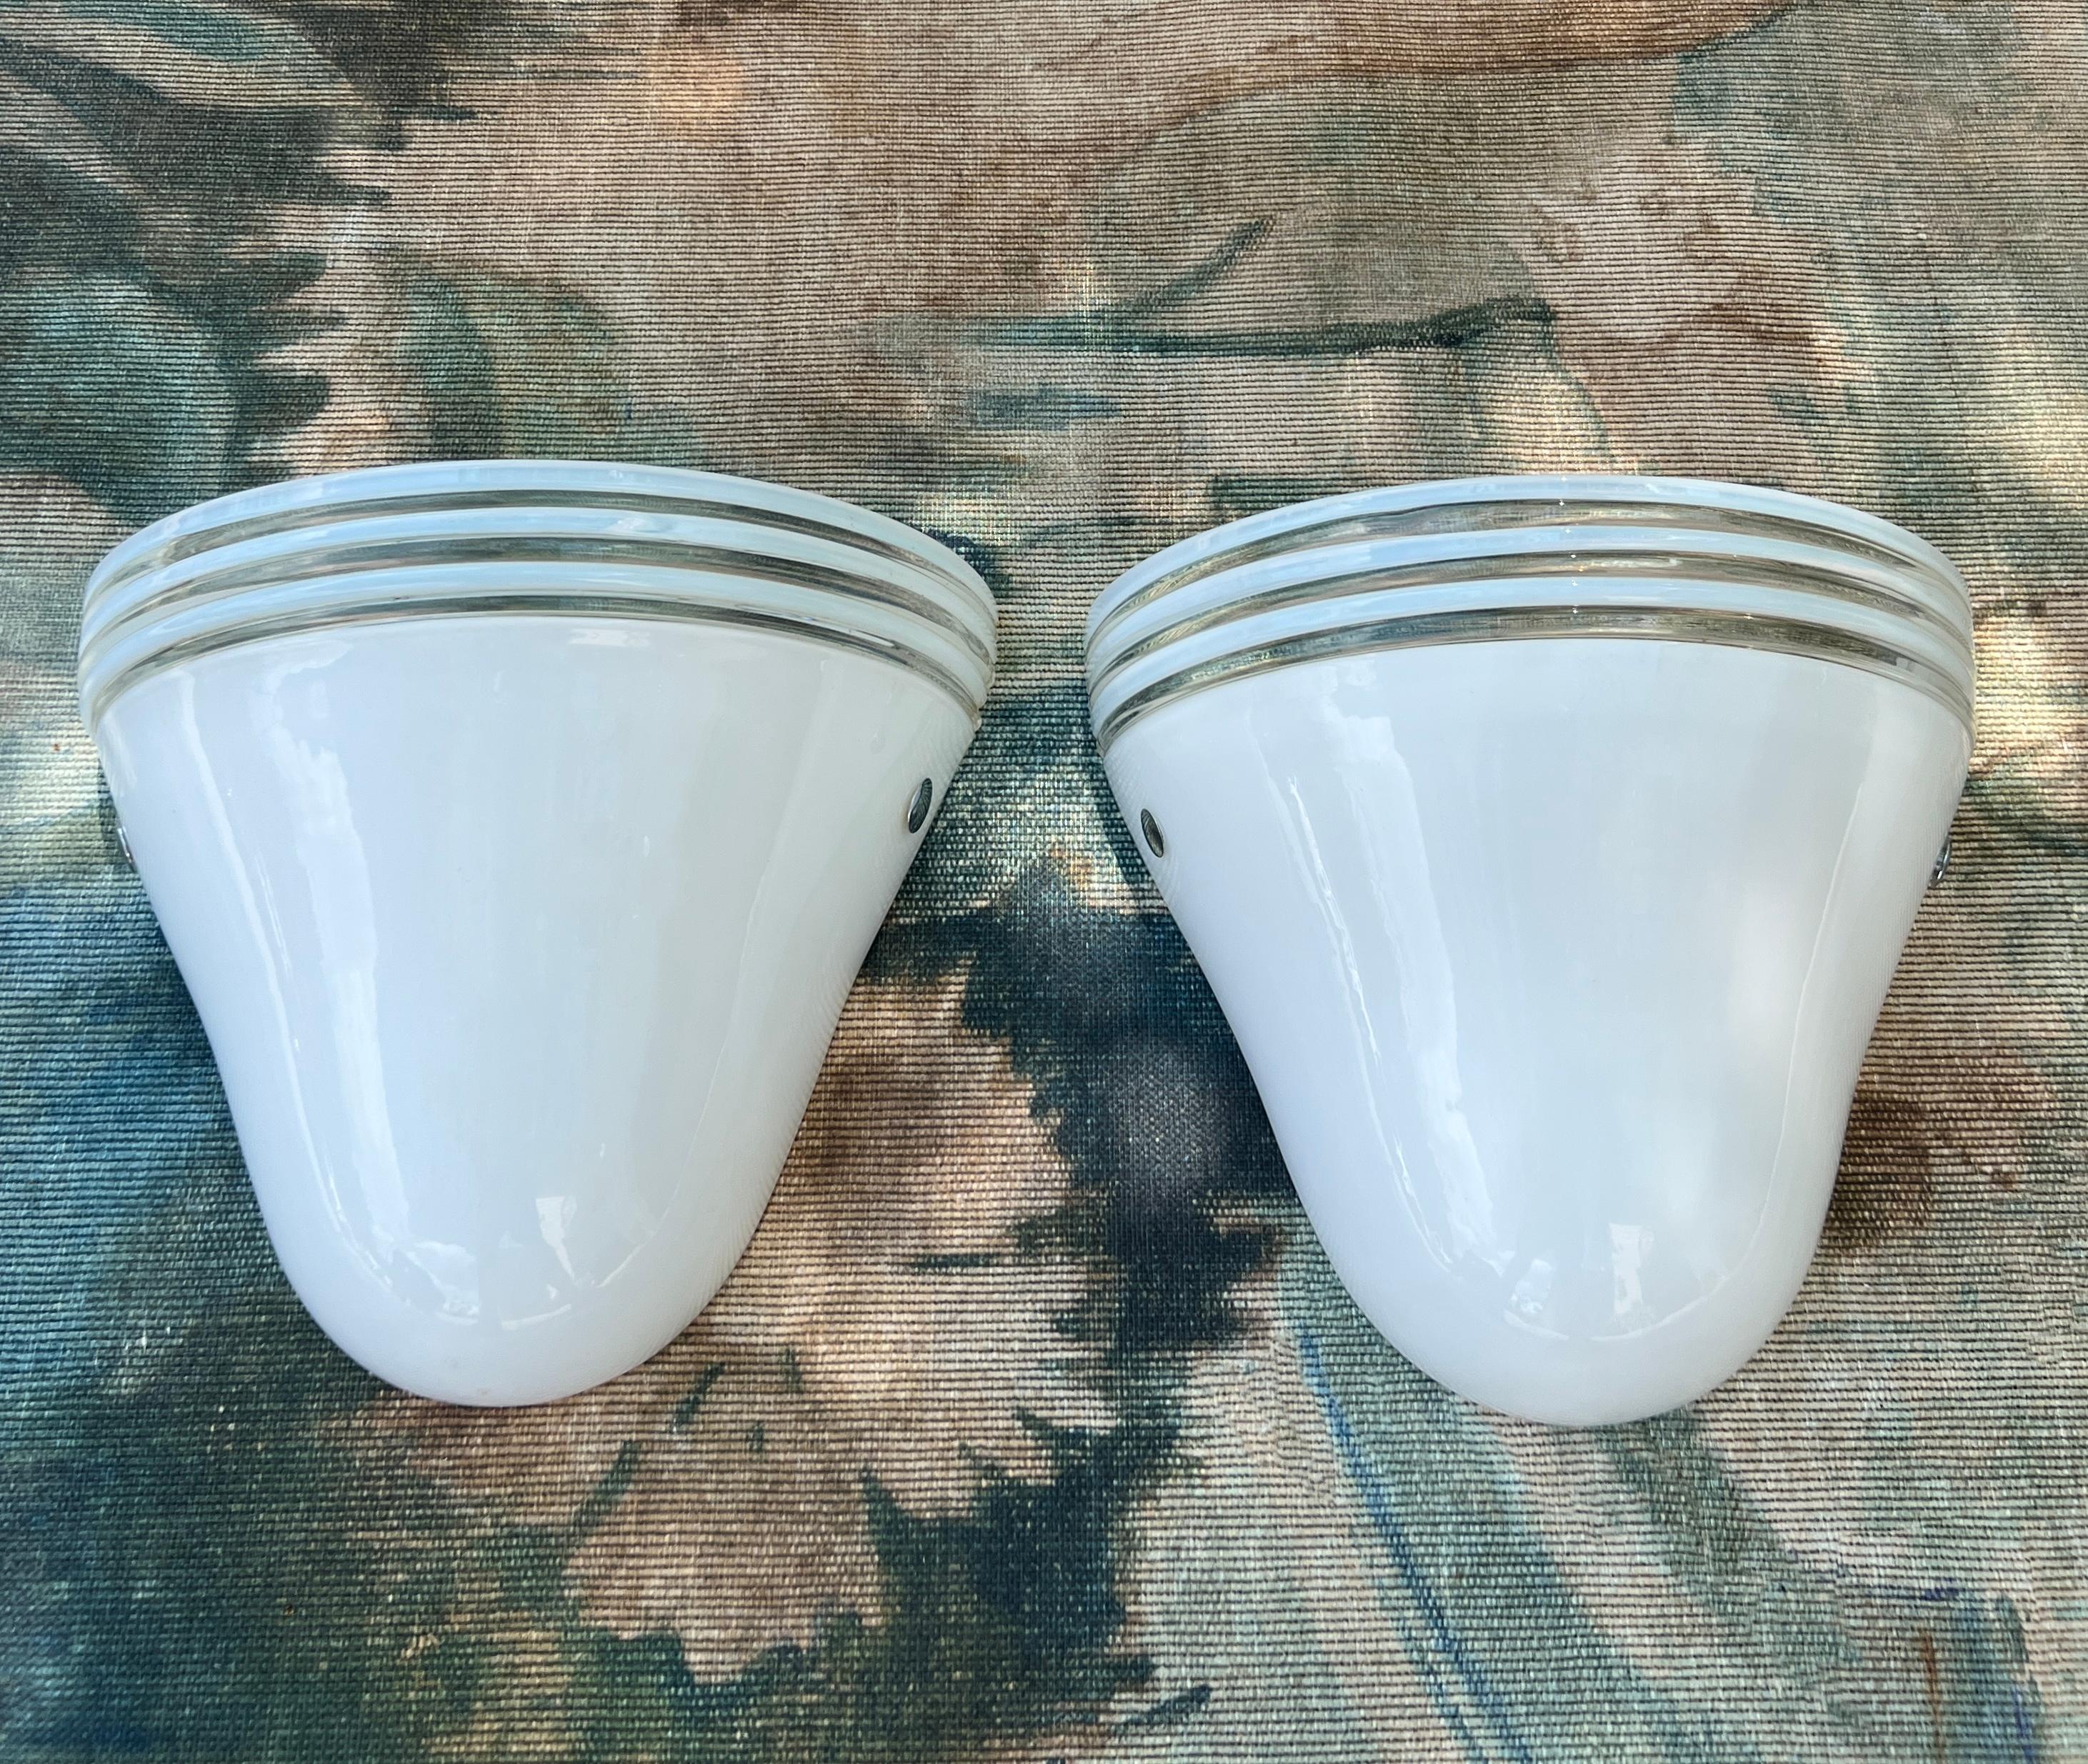 Set/Three Mid-Century Modern White Murano Glass Sconces by Leucos, Italy c. 1975 For Sale 2